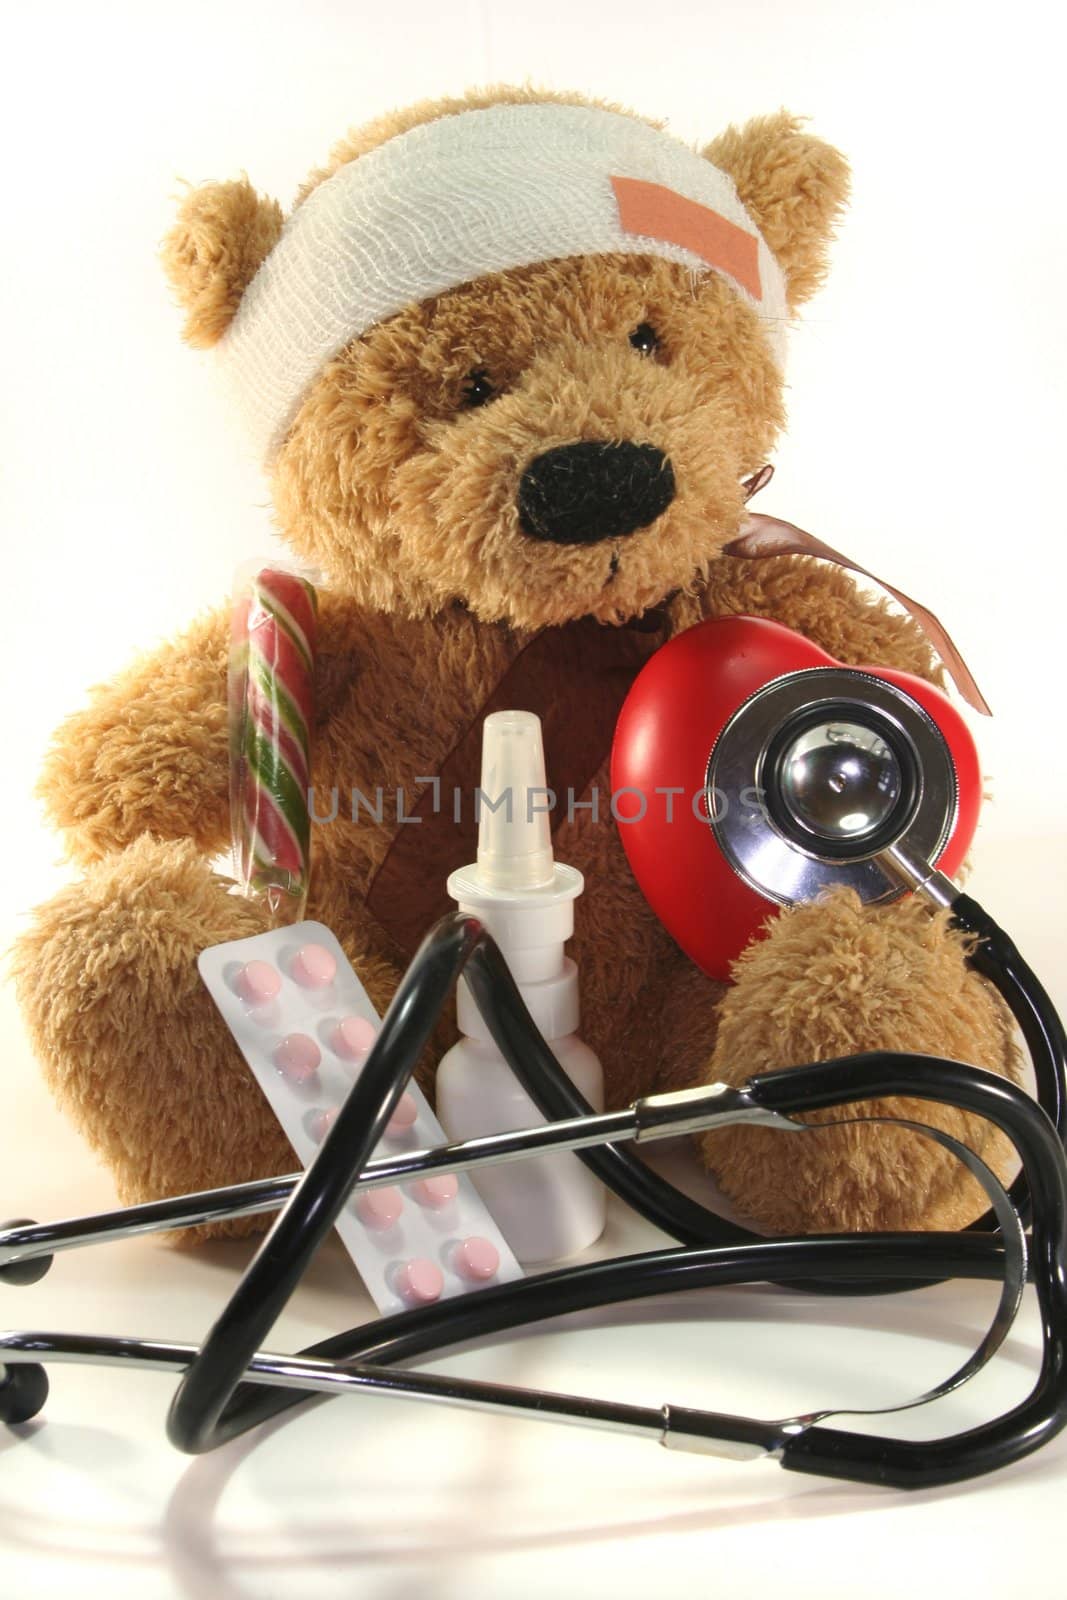 injured Teddy child with doll doctor on a white background